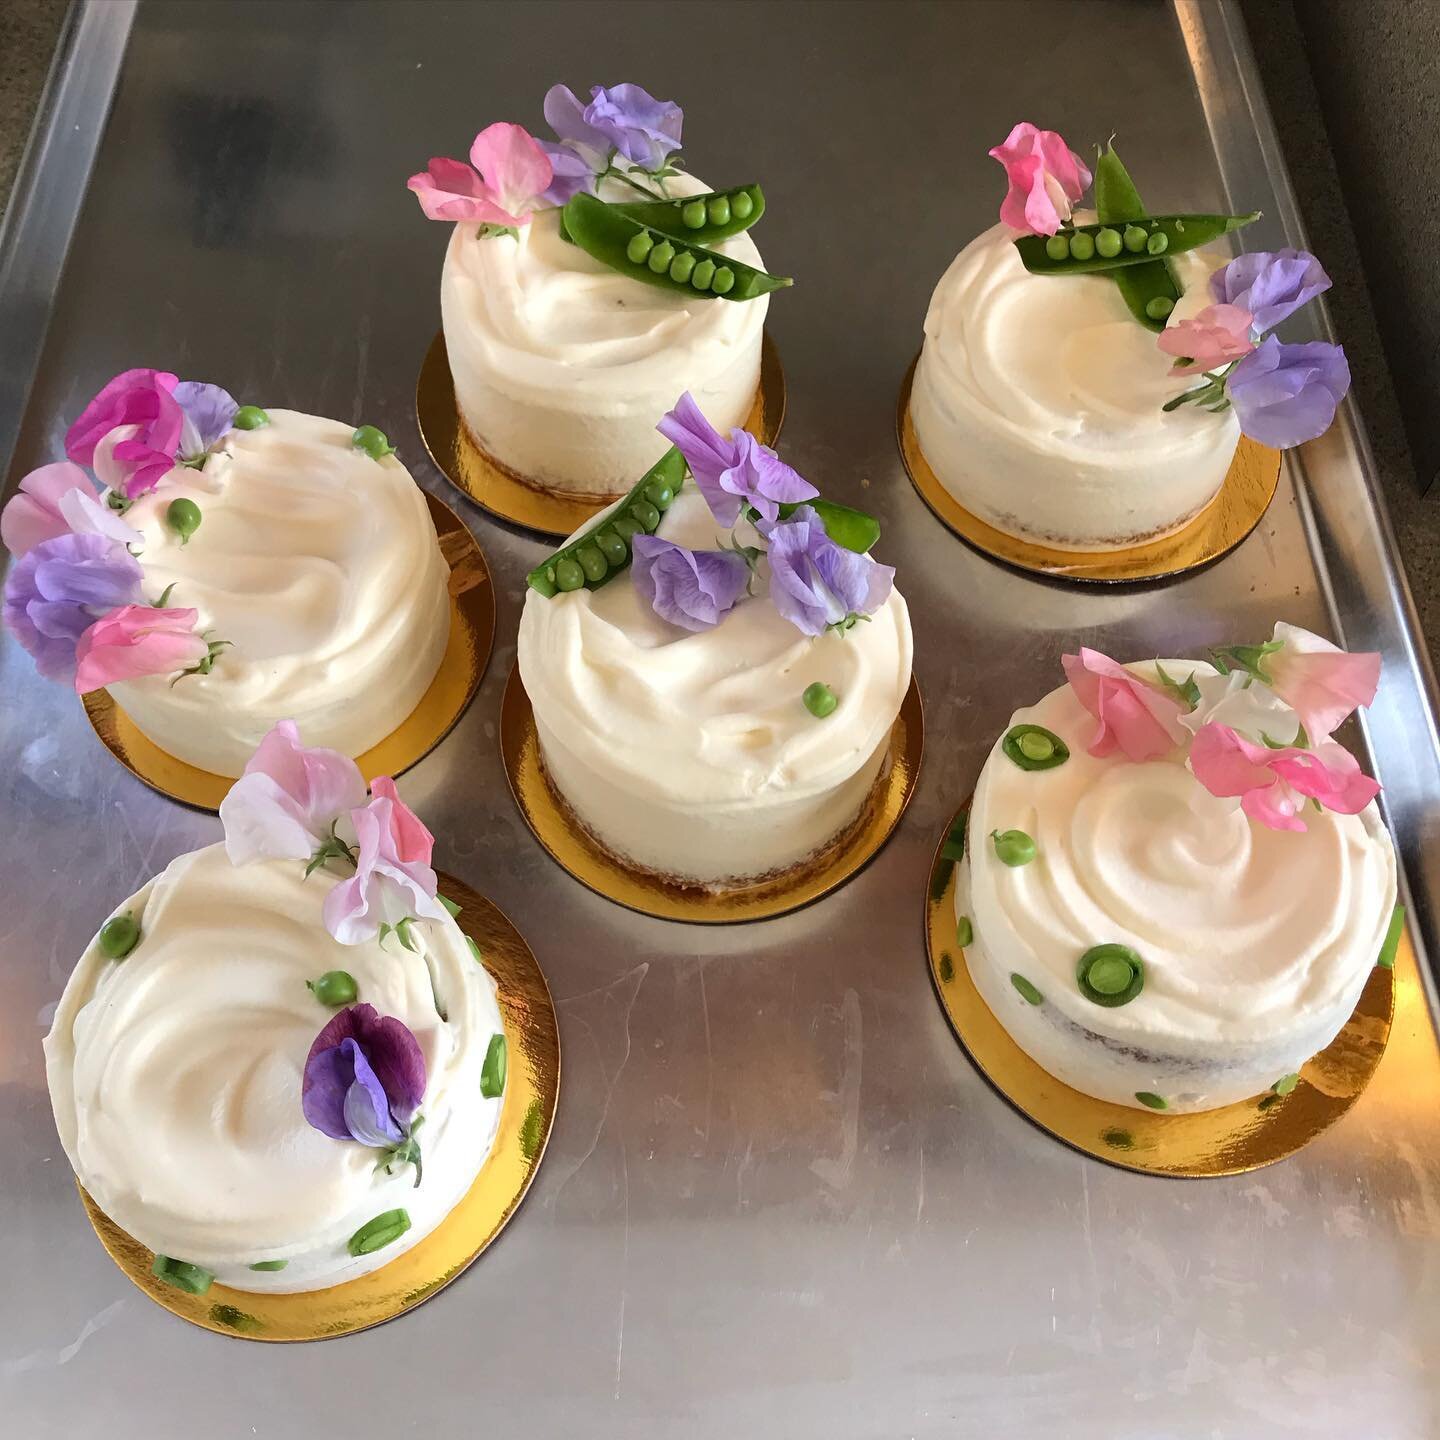 Sweet pea mini cakes from spring. Pea chiffon layers, strawberry filling, Floral chantilly frosting. 
.
.
.
.
.
.
#cake #cakes #cakesofinstagram #cakedecorating #cakedesign #instagramcakes #pastry #glutenfree #glutenfreecake #gfcake #glutenfreepastry